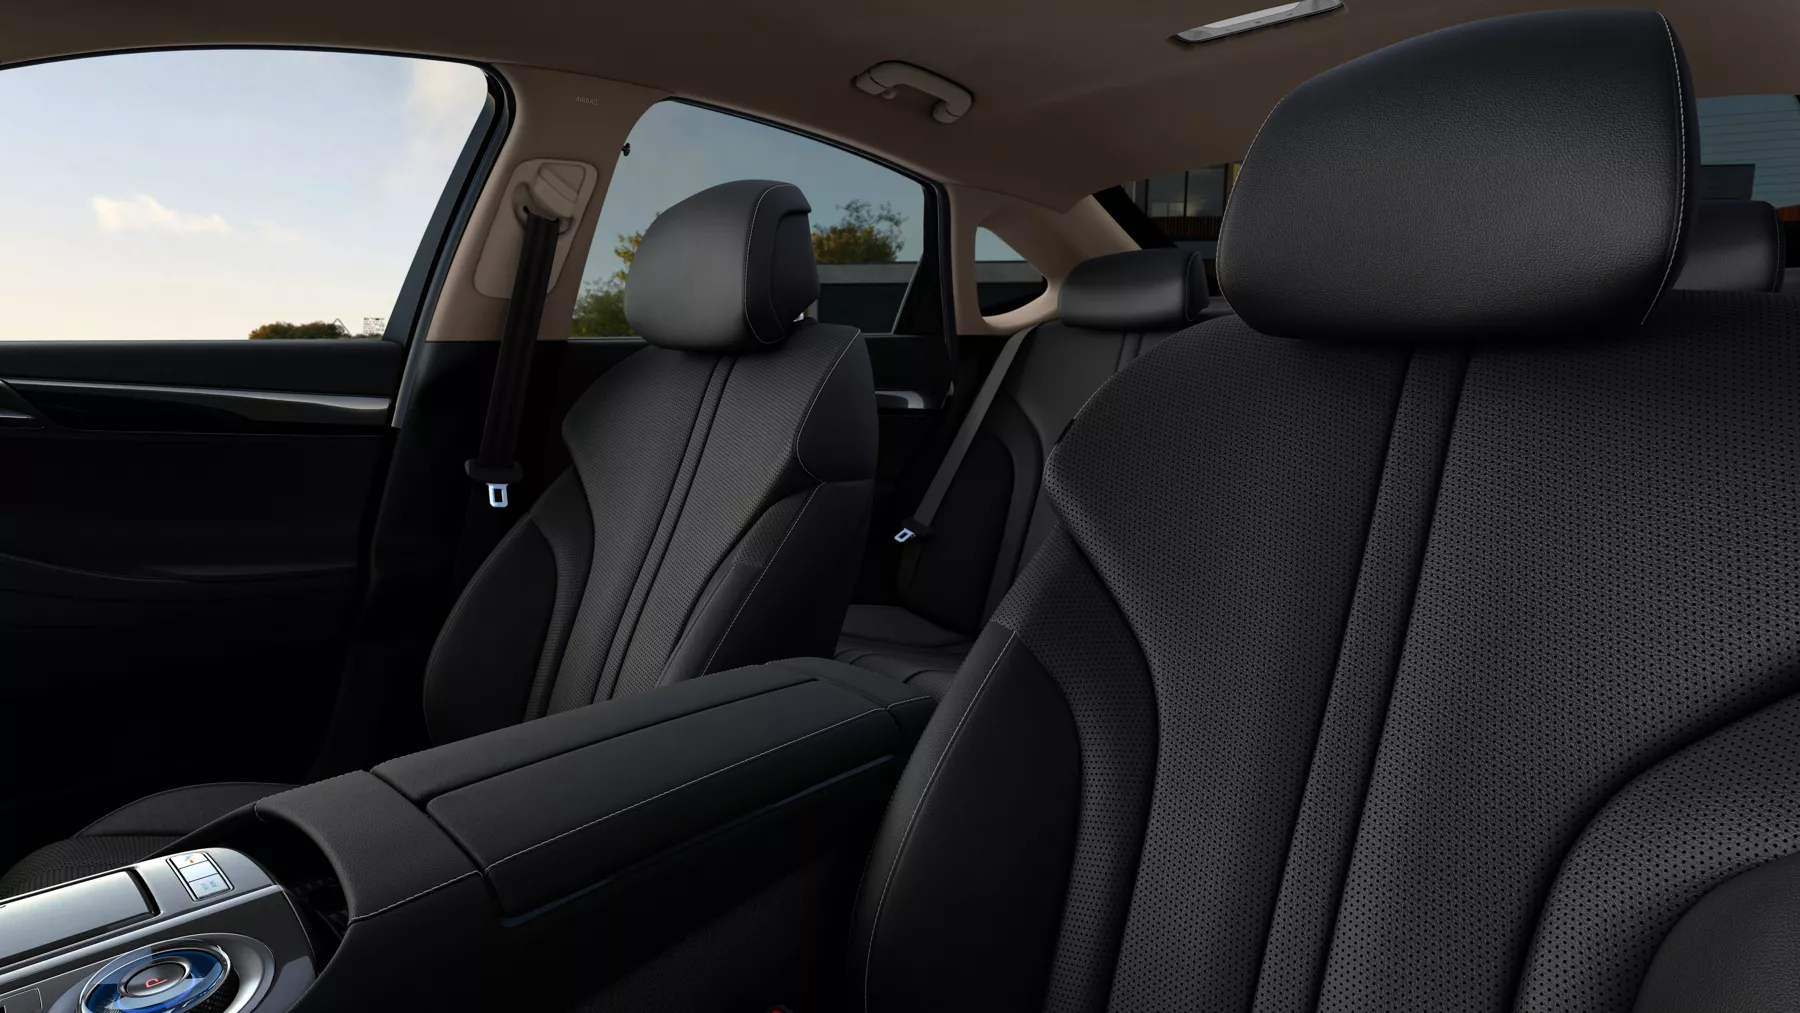 G80 front seats in black color. 